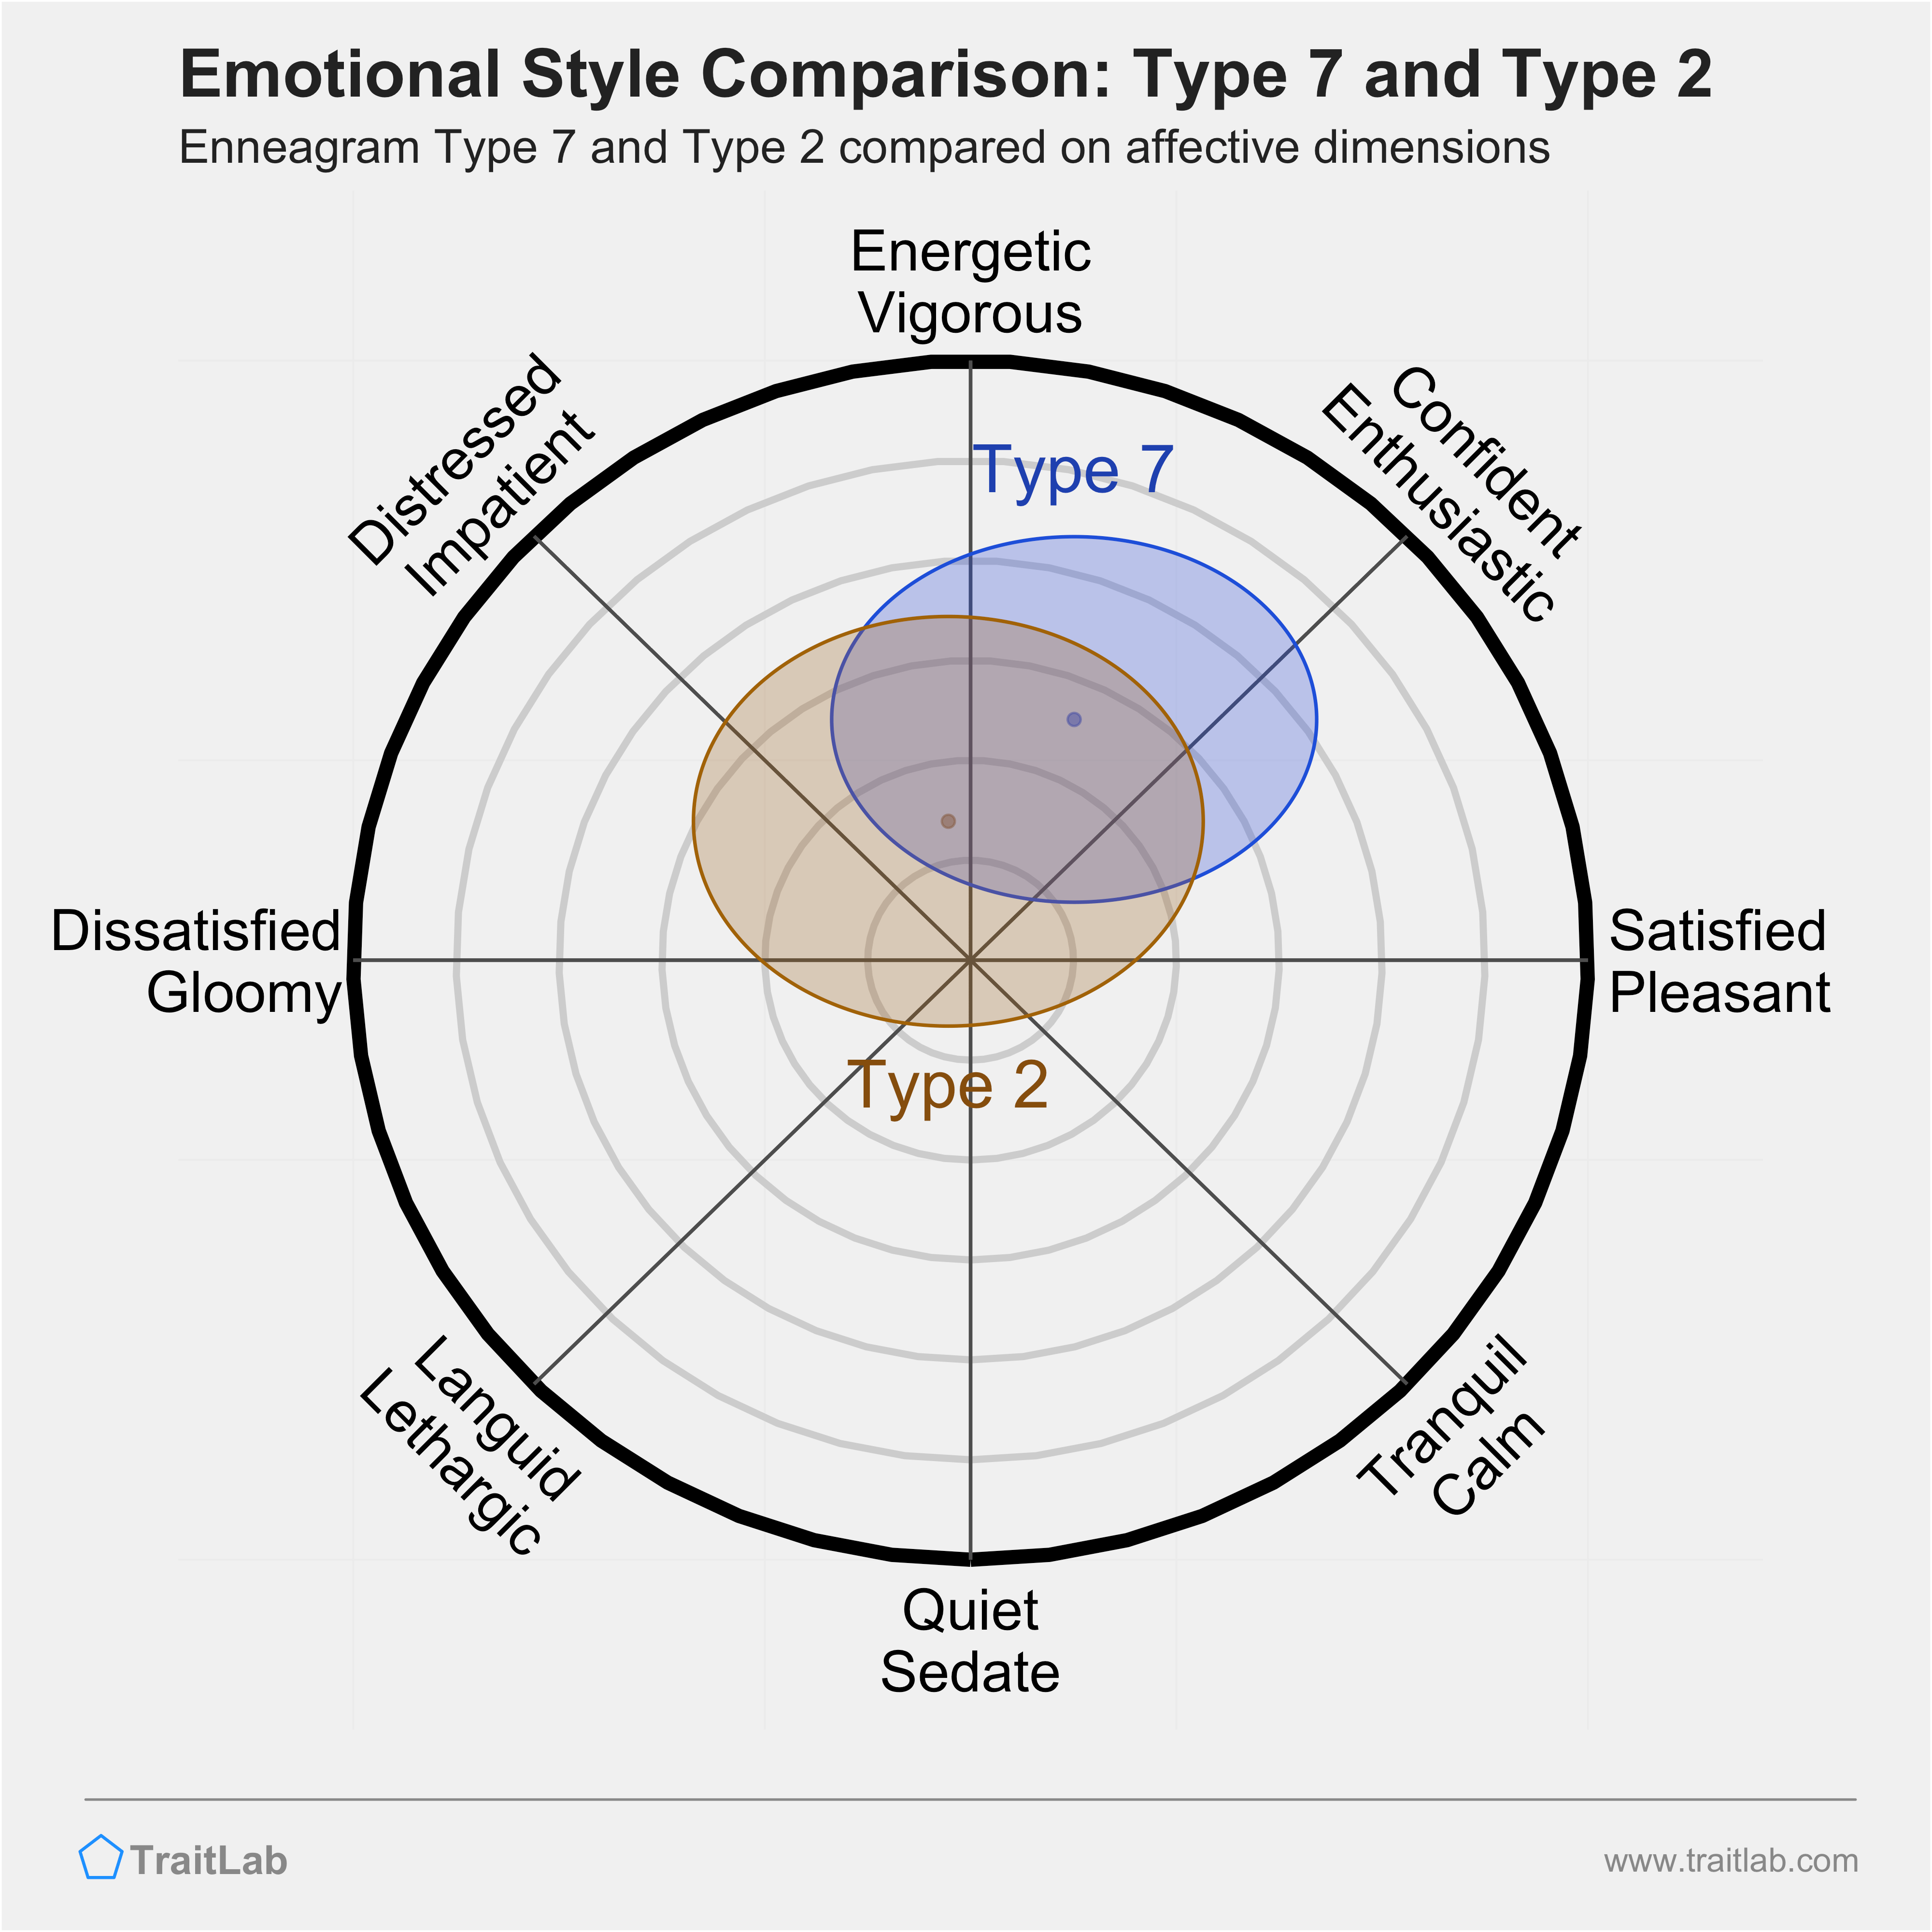 Type 7 and Type 2 comparison across emotional (affective) dimensions